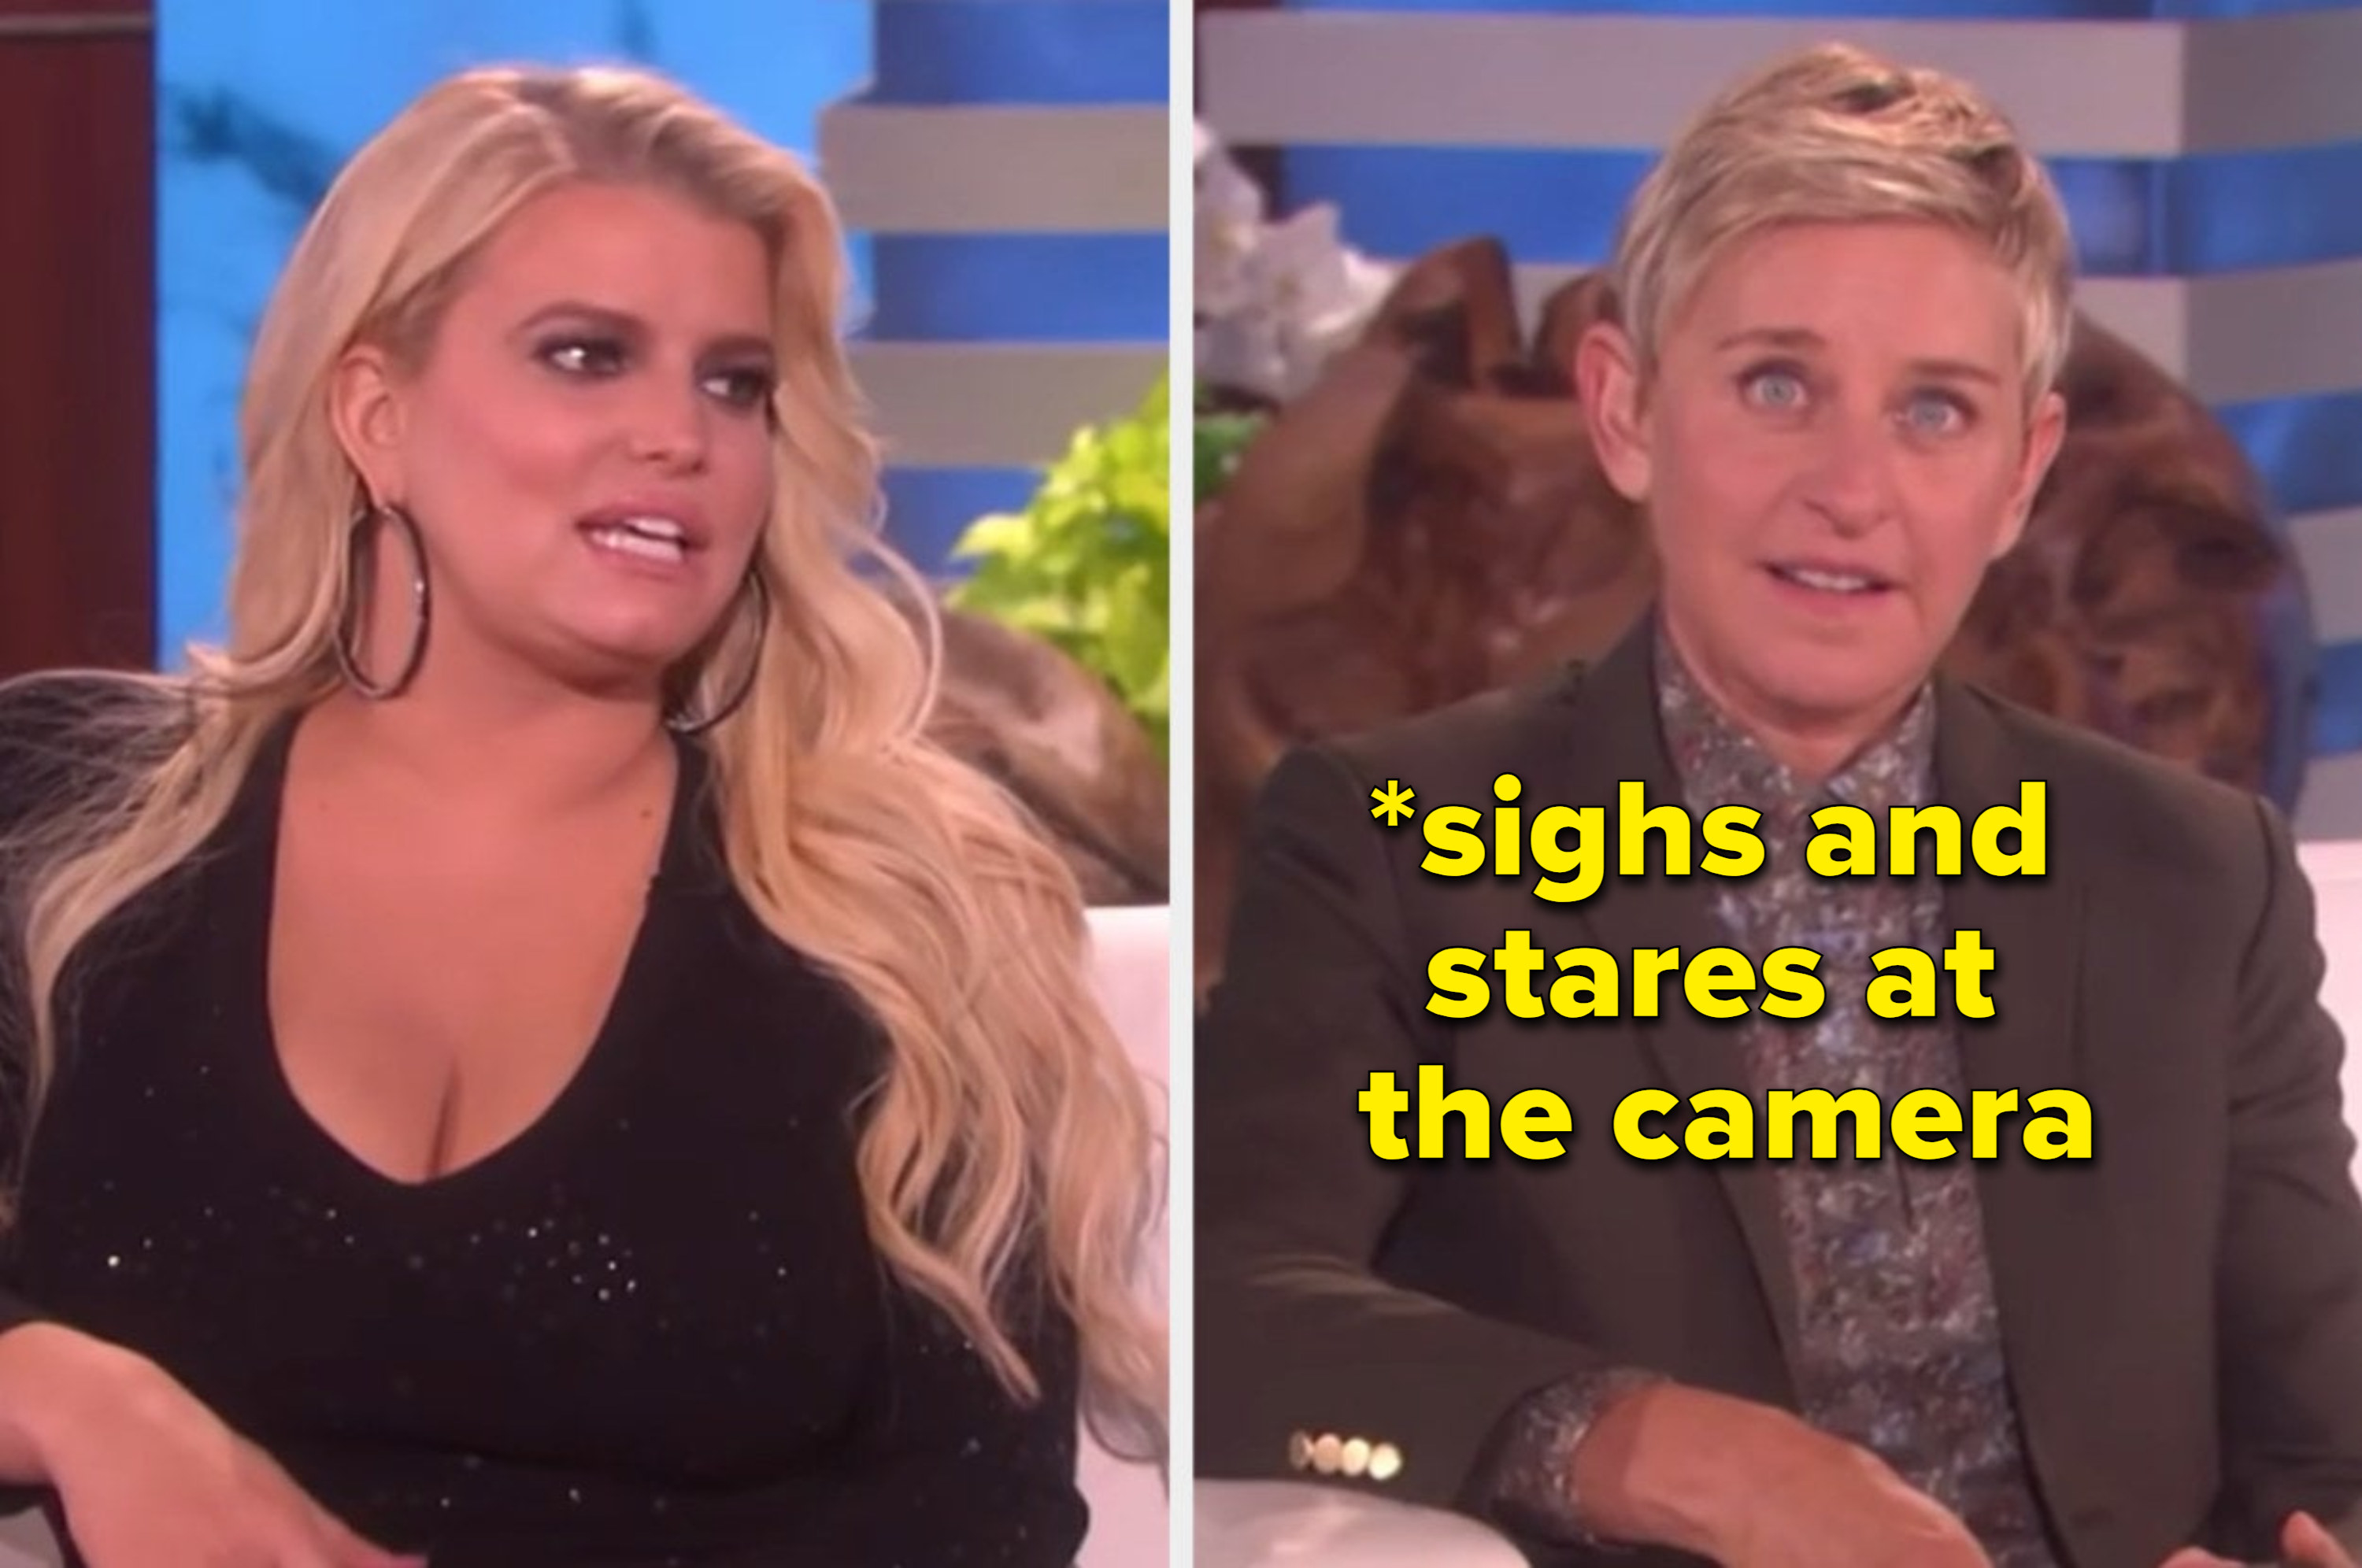 Jessica Simpson fumbling during the interview and Ellen sighing and looking directly at the camera